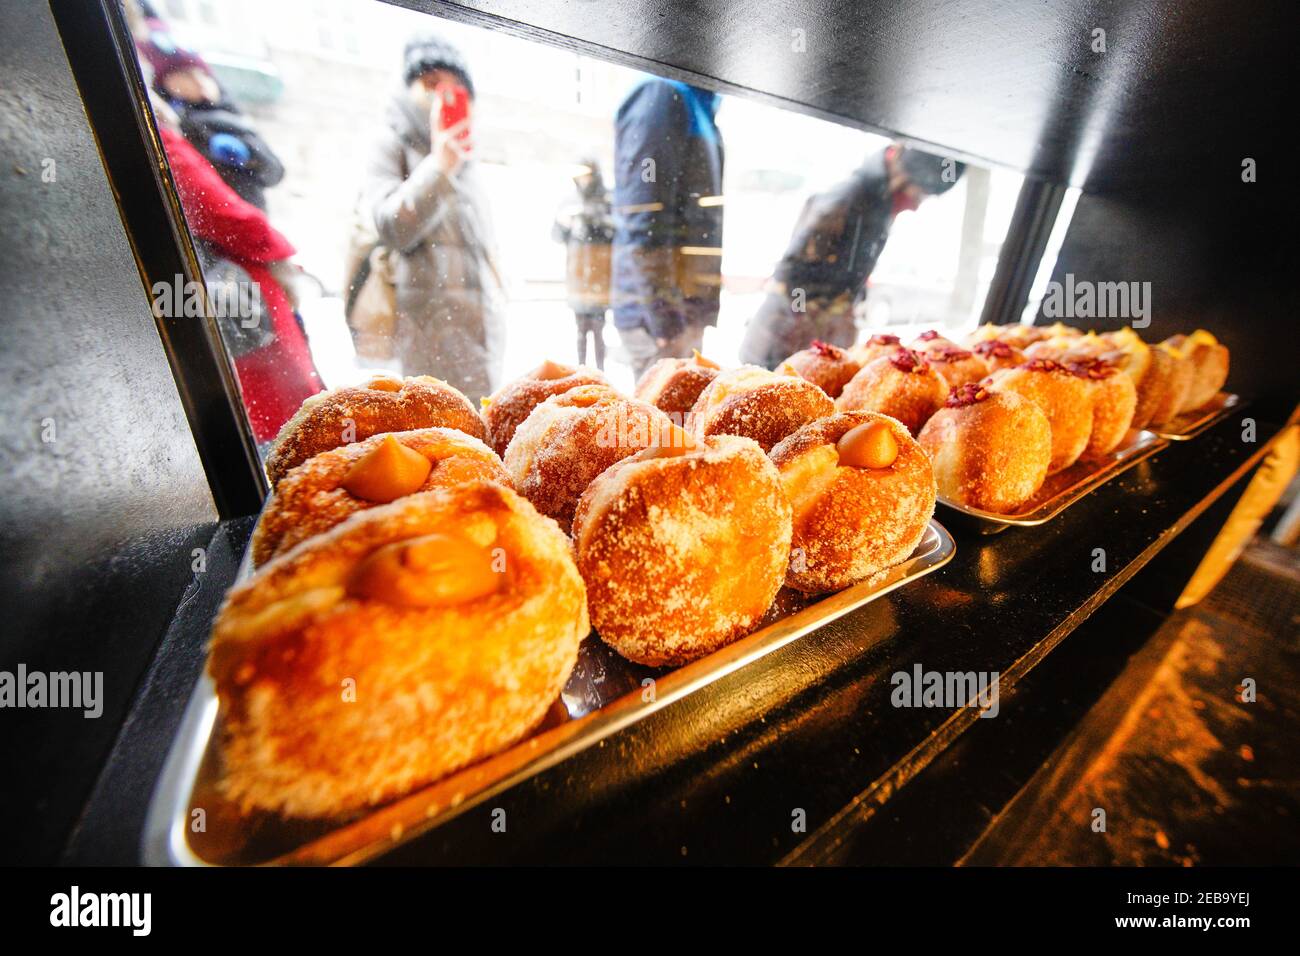 (210212) -- WARSAW, Feb. 12, 2021 (Xinhua) -- Polish fried donuts, or Paczki, are seen in a window display at a bakery in Warsaw, Poland, Feb. 11, 2021. People in Poland eat Paczki, fried donuts filled with cream or jam, on Fat Thursday to mark the last Thursday before the start of Lent. (Photo by Jaap Arriens/Xinhua) Stock Photo